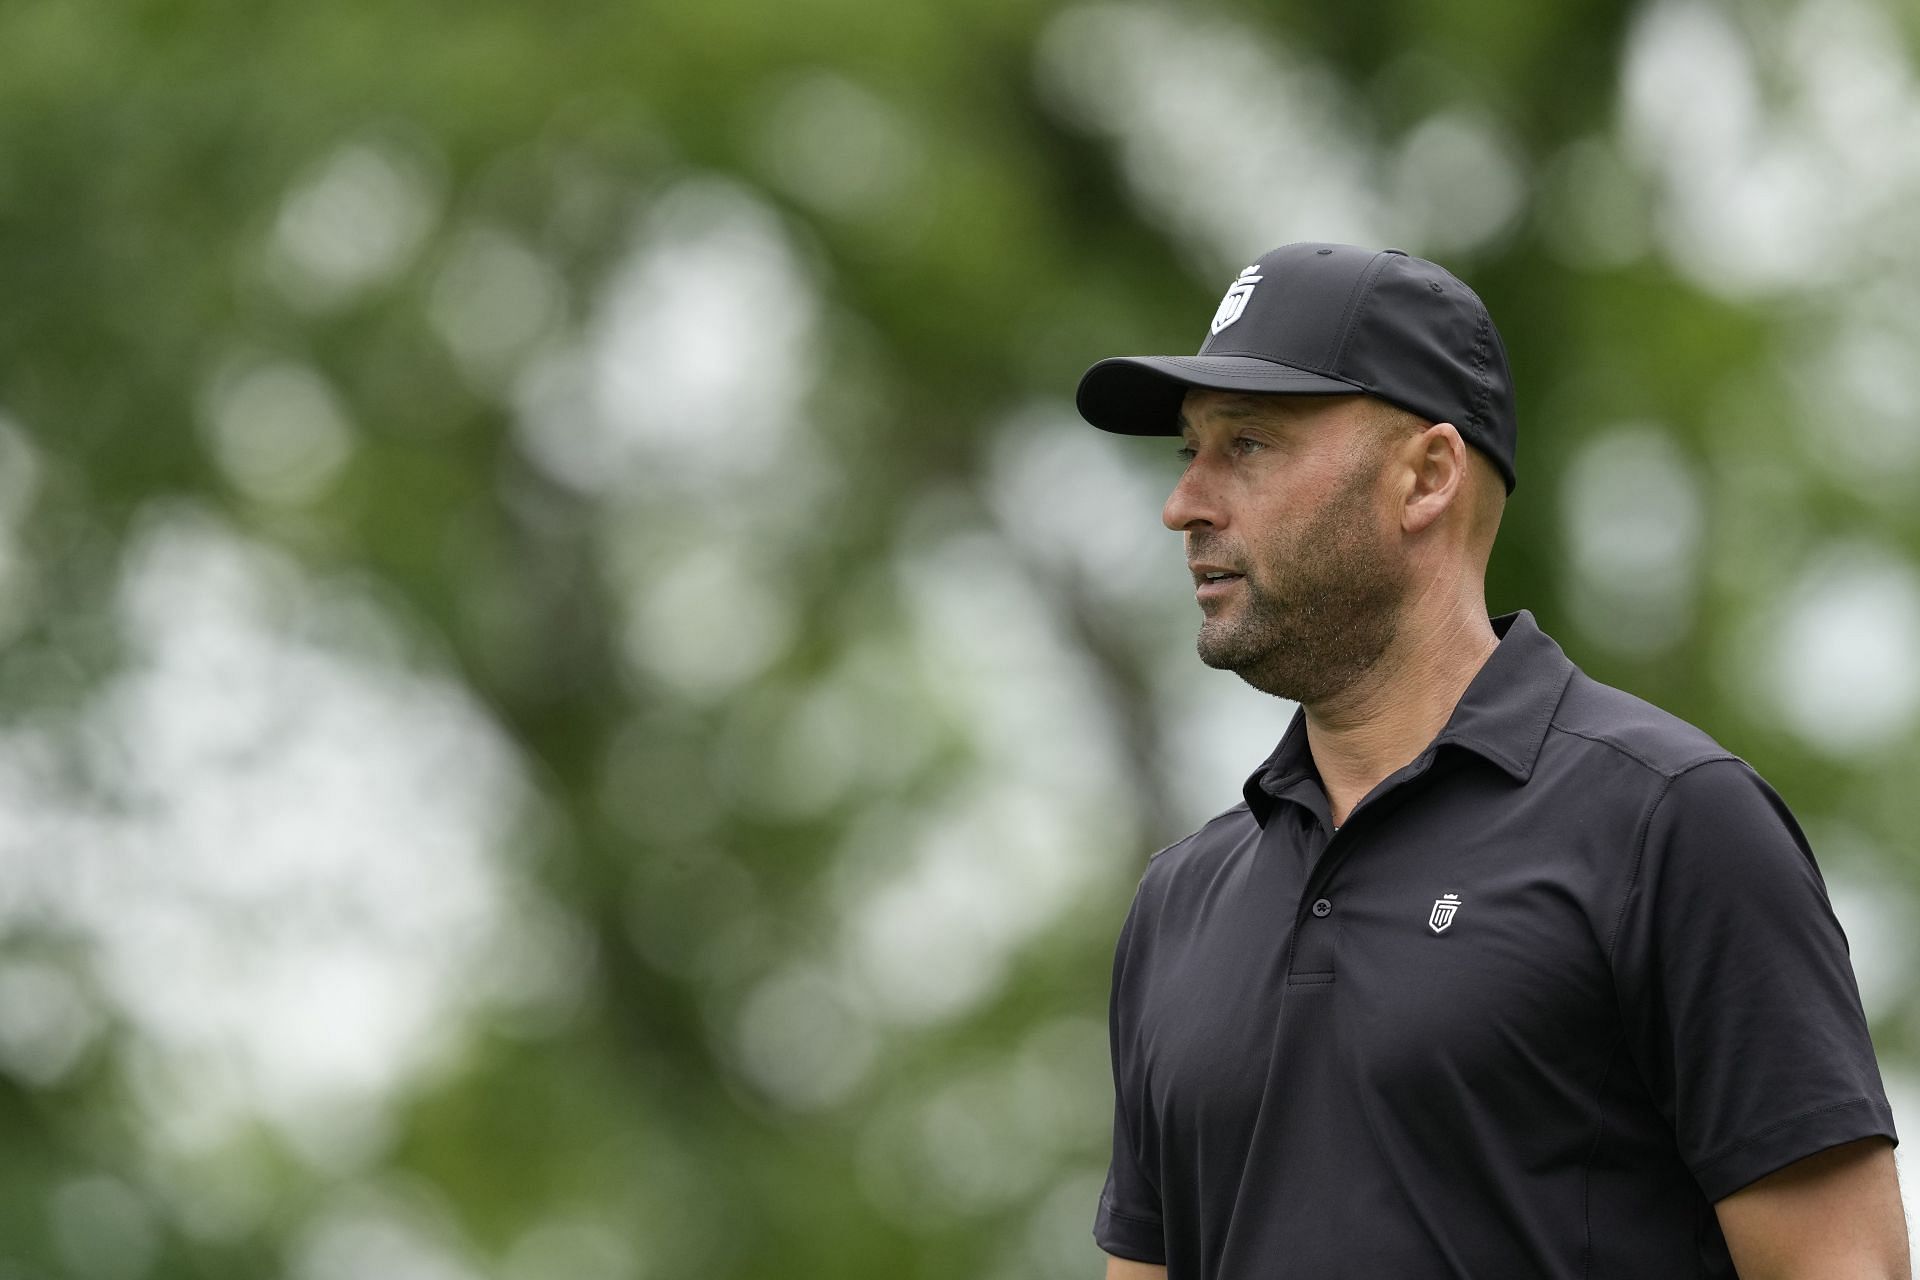 Derek Jeter during the American Family Insurance Championship - Round Two